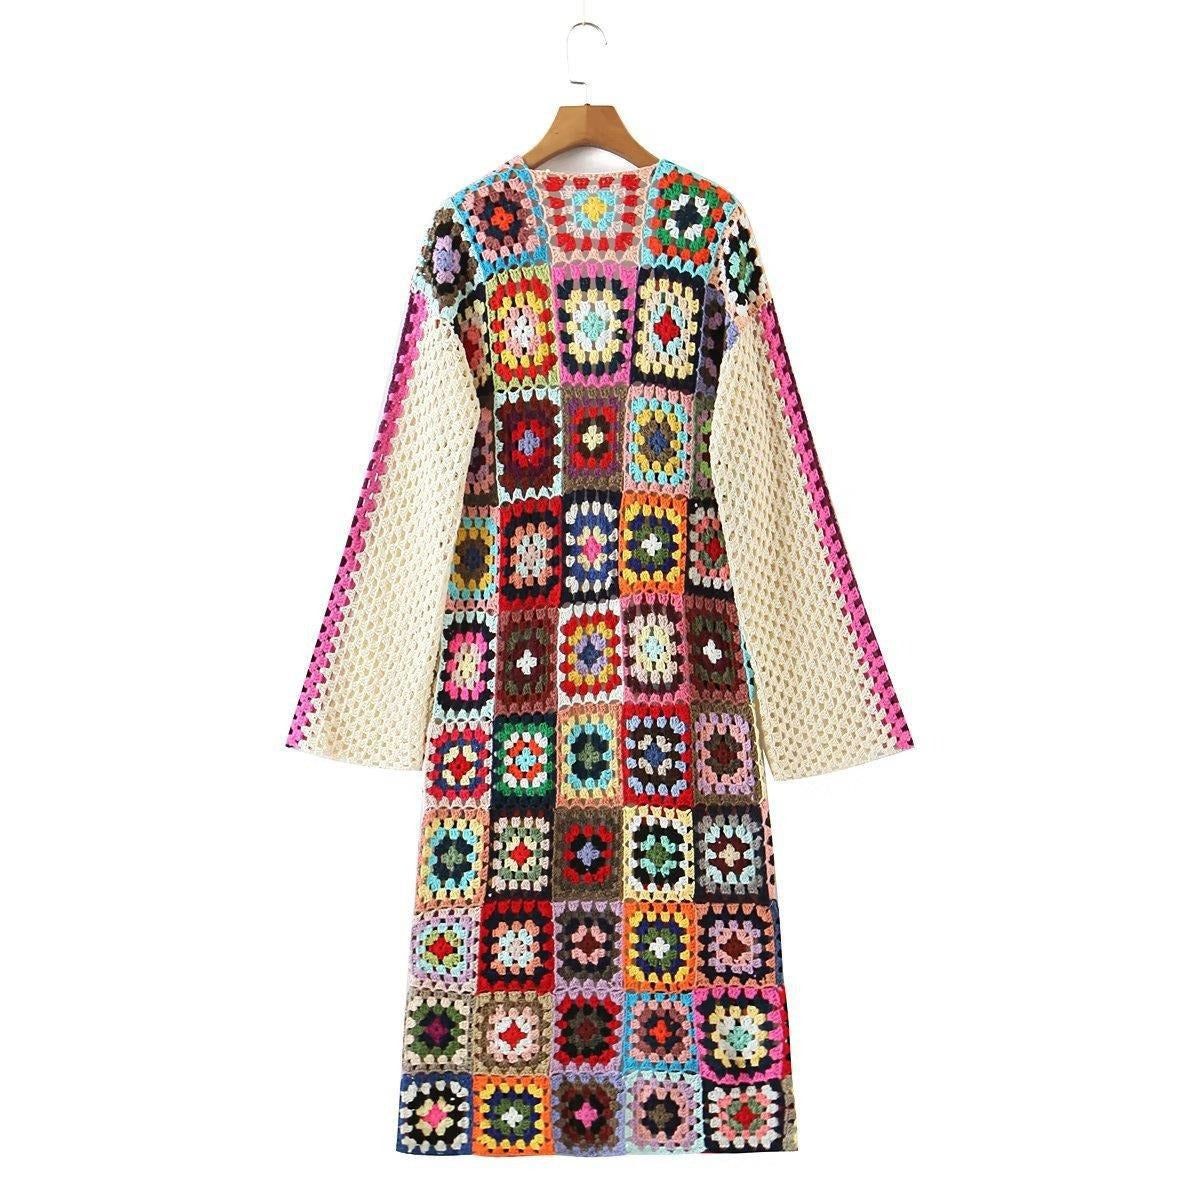 New European and American Style Fashion Temperament Urban Leisure Women's Fully Handmade Grandmother Checkered Knitted Coat